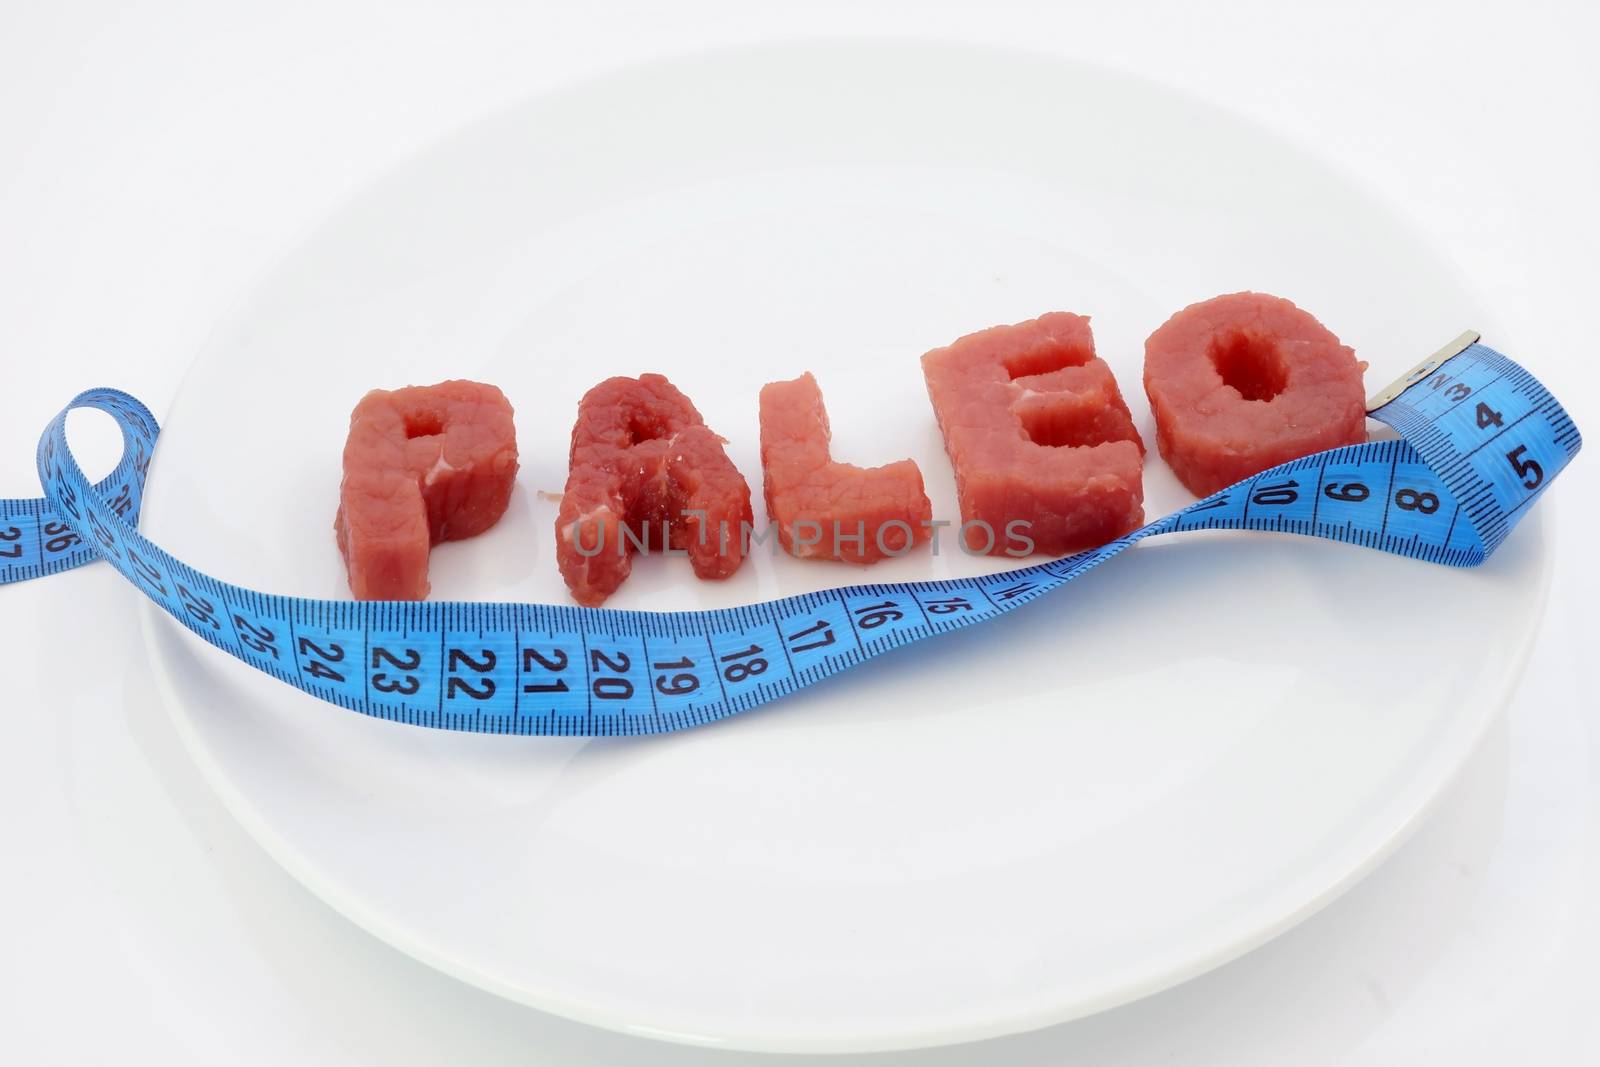 paleo diet and weight loss